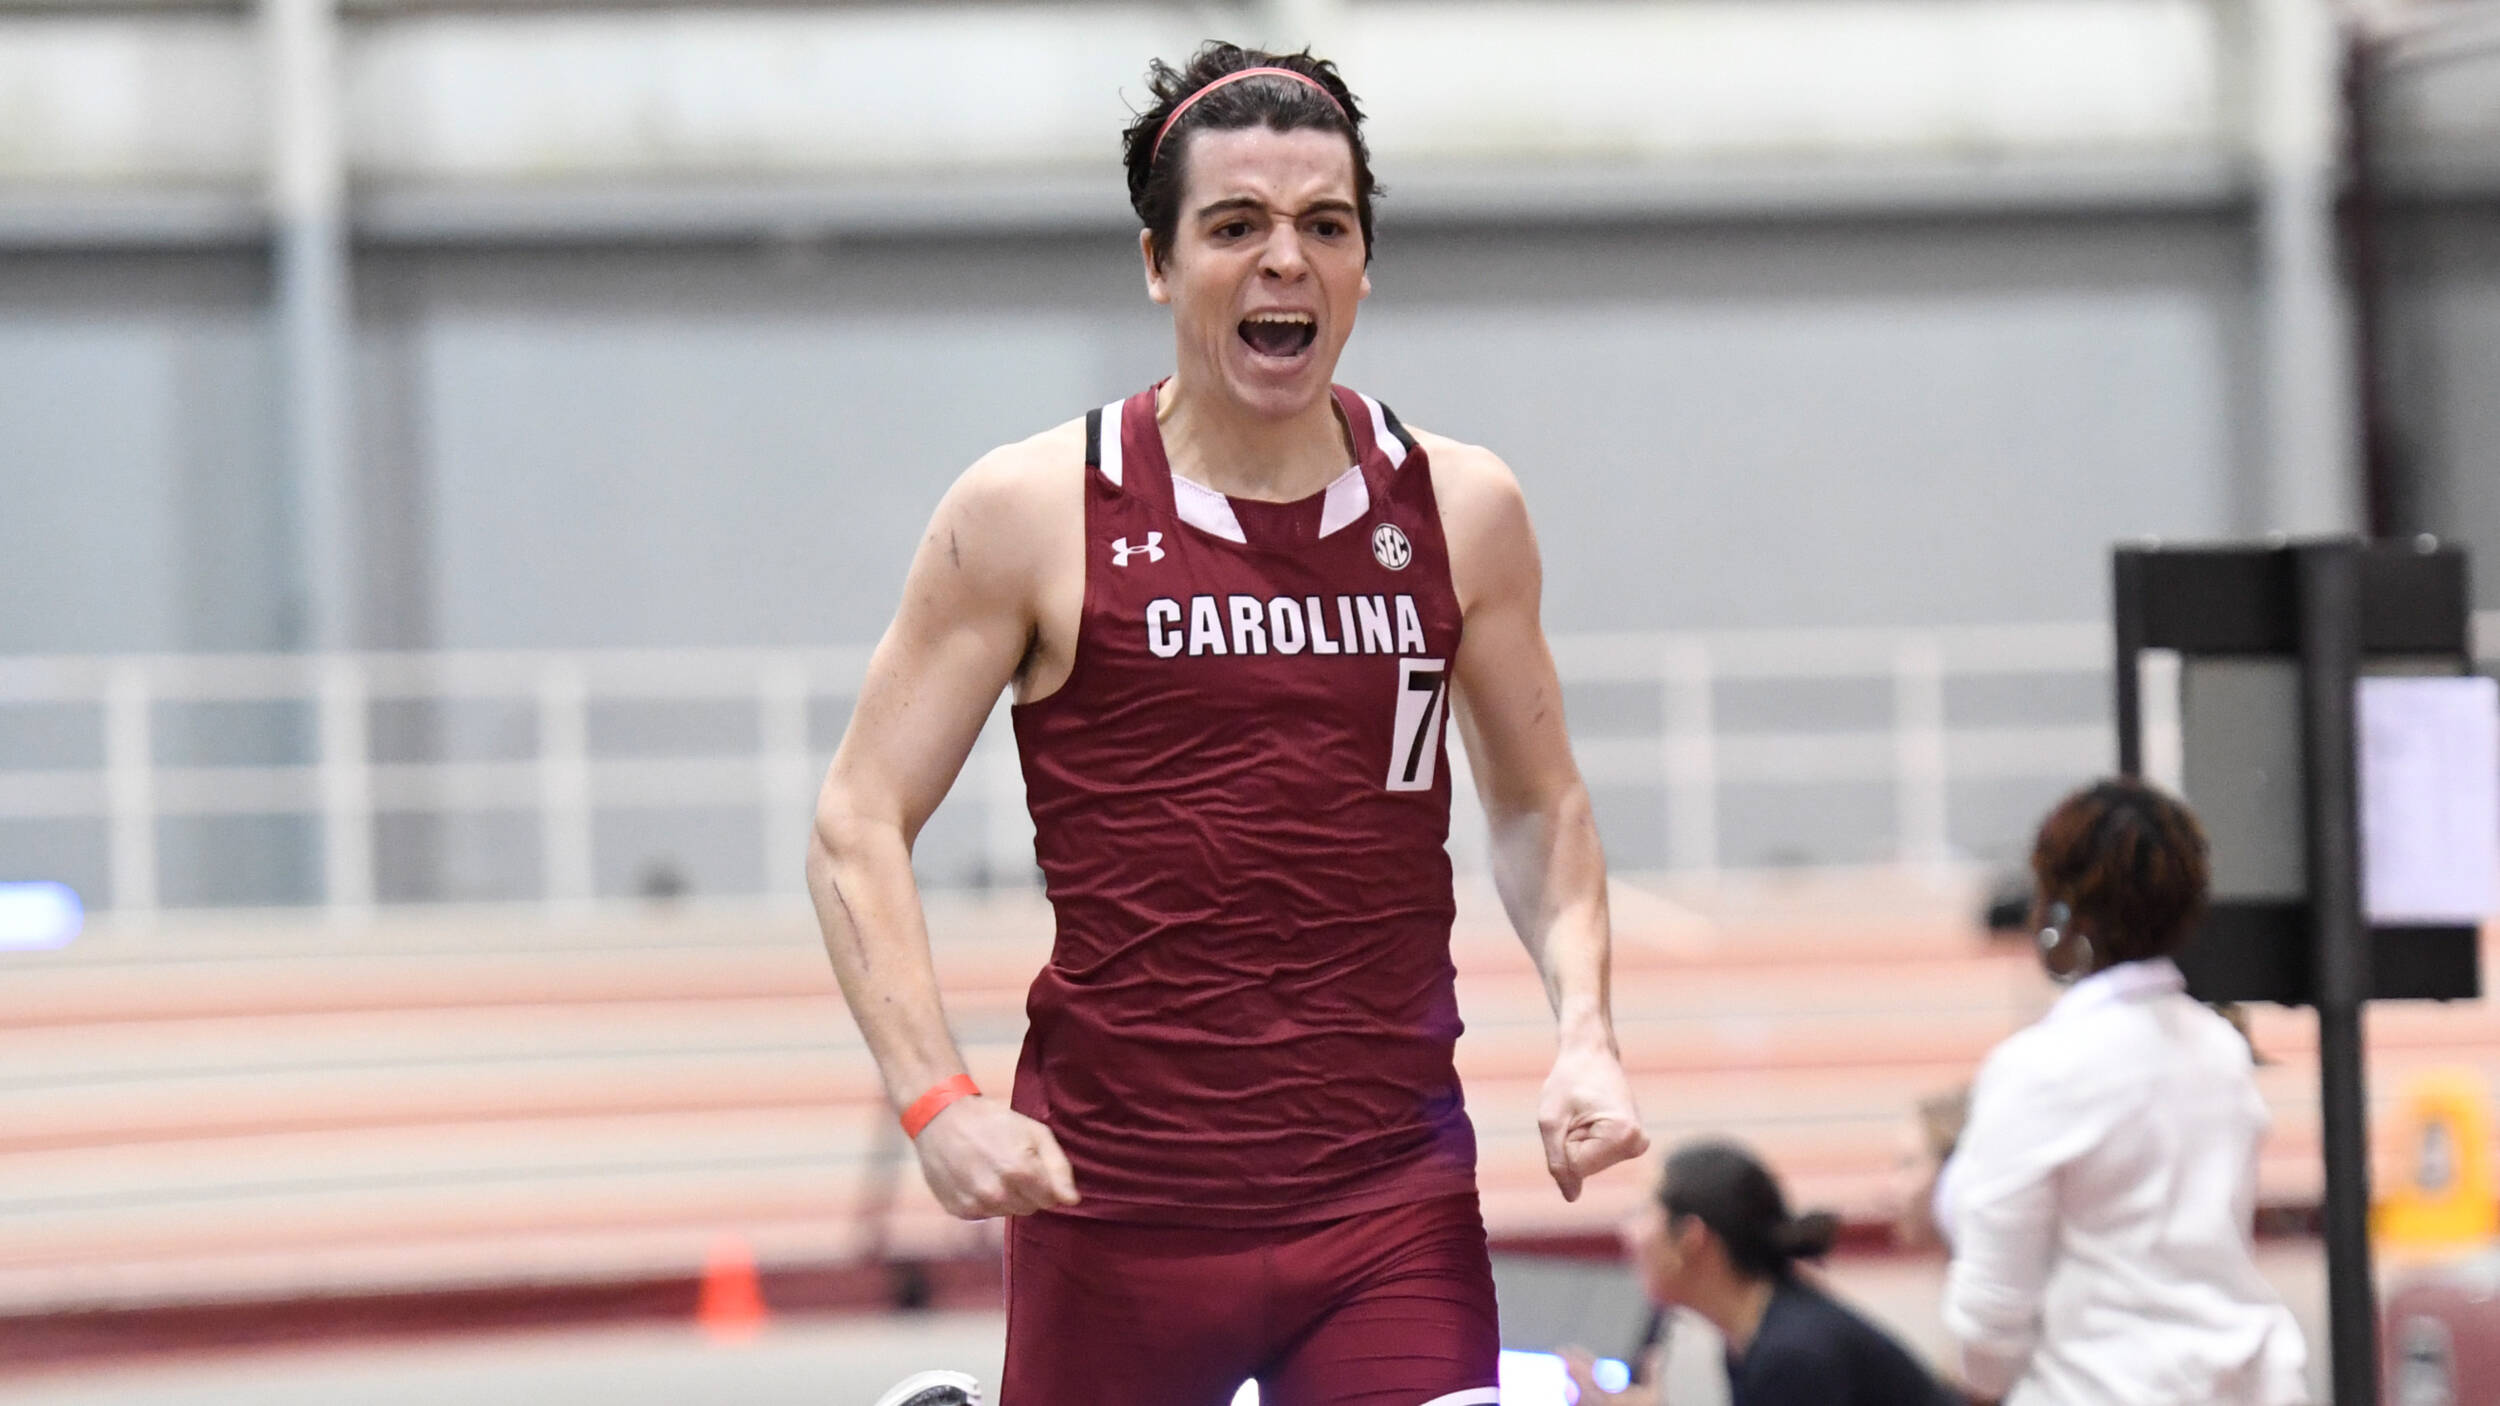 Track & Field Ready for Big Test in Clemson